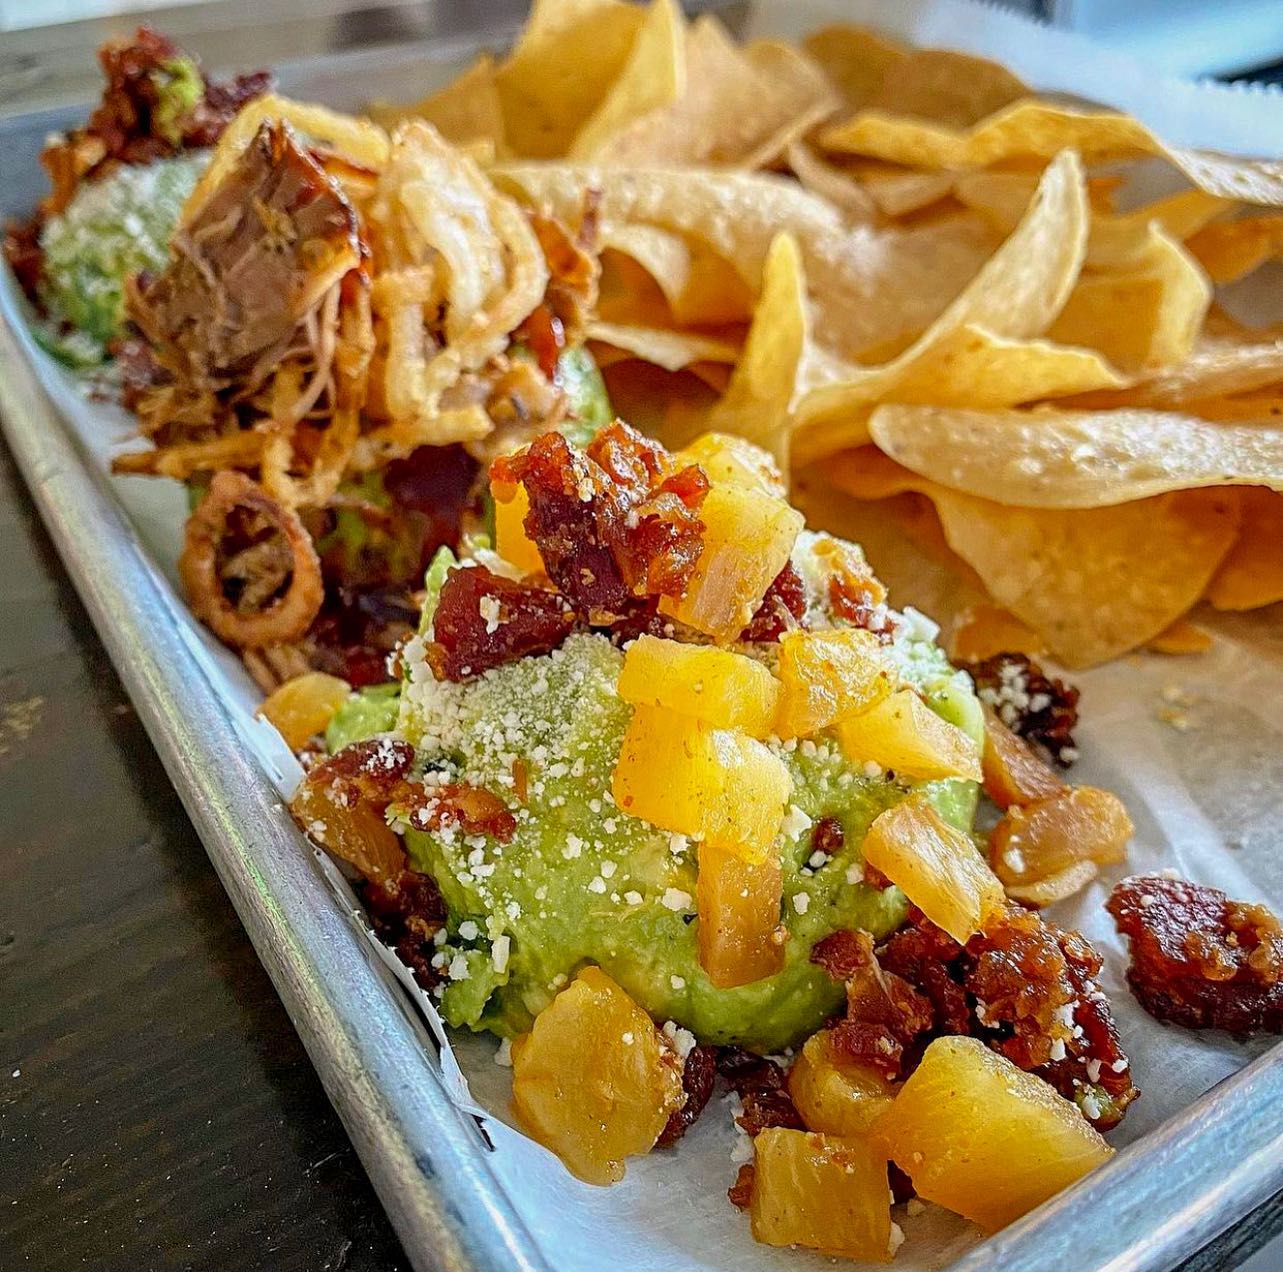 Life is full of hard choices. Choosing one topping for your guacamole isn’t fair. That’s why we invented THE GUAC FLIGHT 🥑✈️. Three portions of our fresh made guac topped with your choice of corn salsa, pico de gallo, sugared bacon & cotija cheese, pulled bbq pork & crispy onions, carnitas & cotija cheese, shrimp rémoulade & corn salsa, or caramelized pineapple + bacon & cotija cheese and more! Guac Flight… That’s the AVO🥑TACO difference! 

#guacamole #freshguacamole #sampling #chipsandguac #caribbeanfood #eatnola #nolaeats #bigeasyeats #wherenolaeats #eatnola #yelpnola #nolafoodie #nolafoodgram #lieats #lifoodies #lifoodgram #newhydepark #gardencity #longislandfoodie #tacosarelife #thursdayvibes #fridayvibes #tastethedifference
📷 @emmaeatsnola